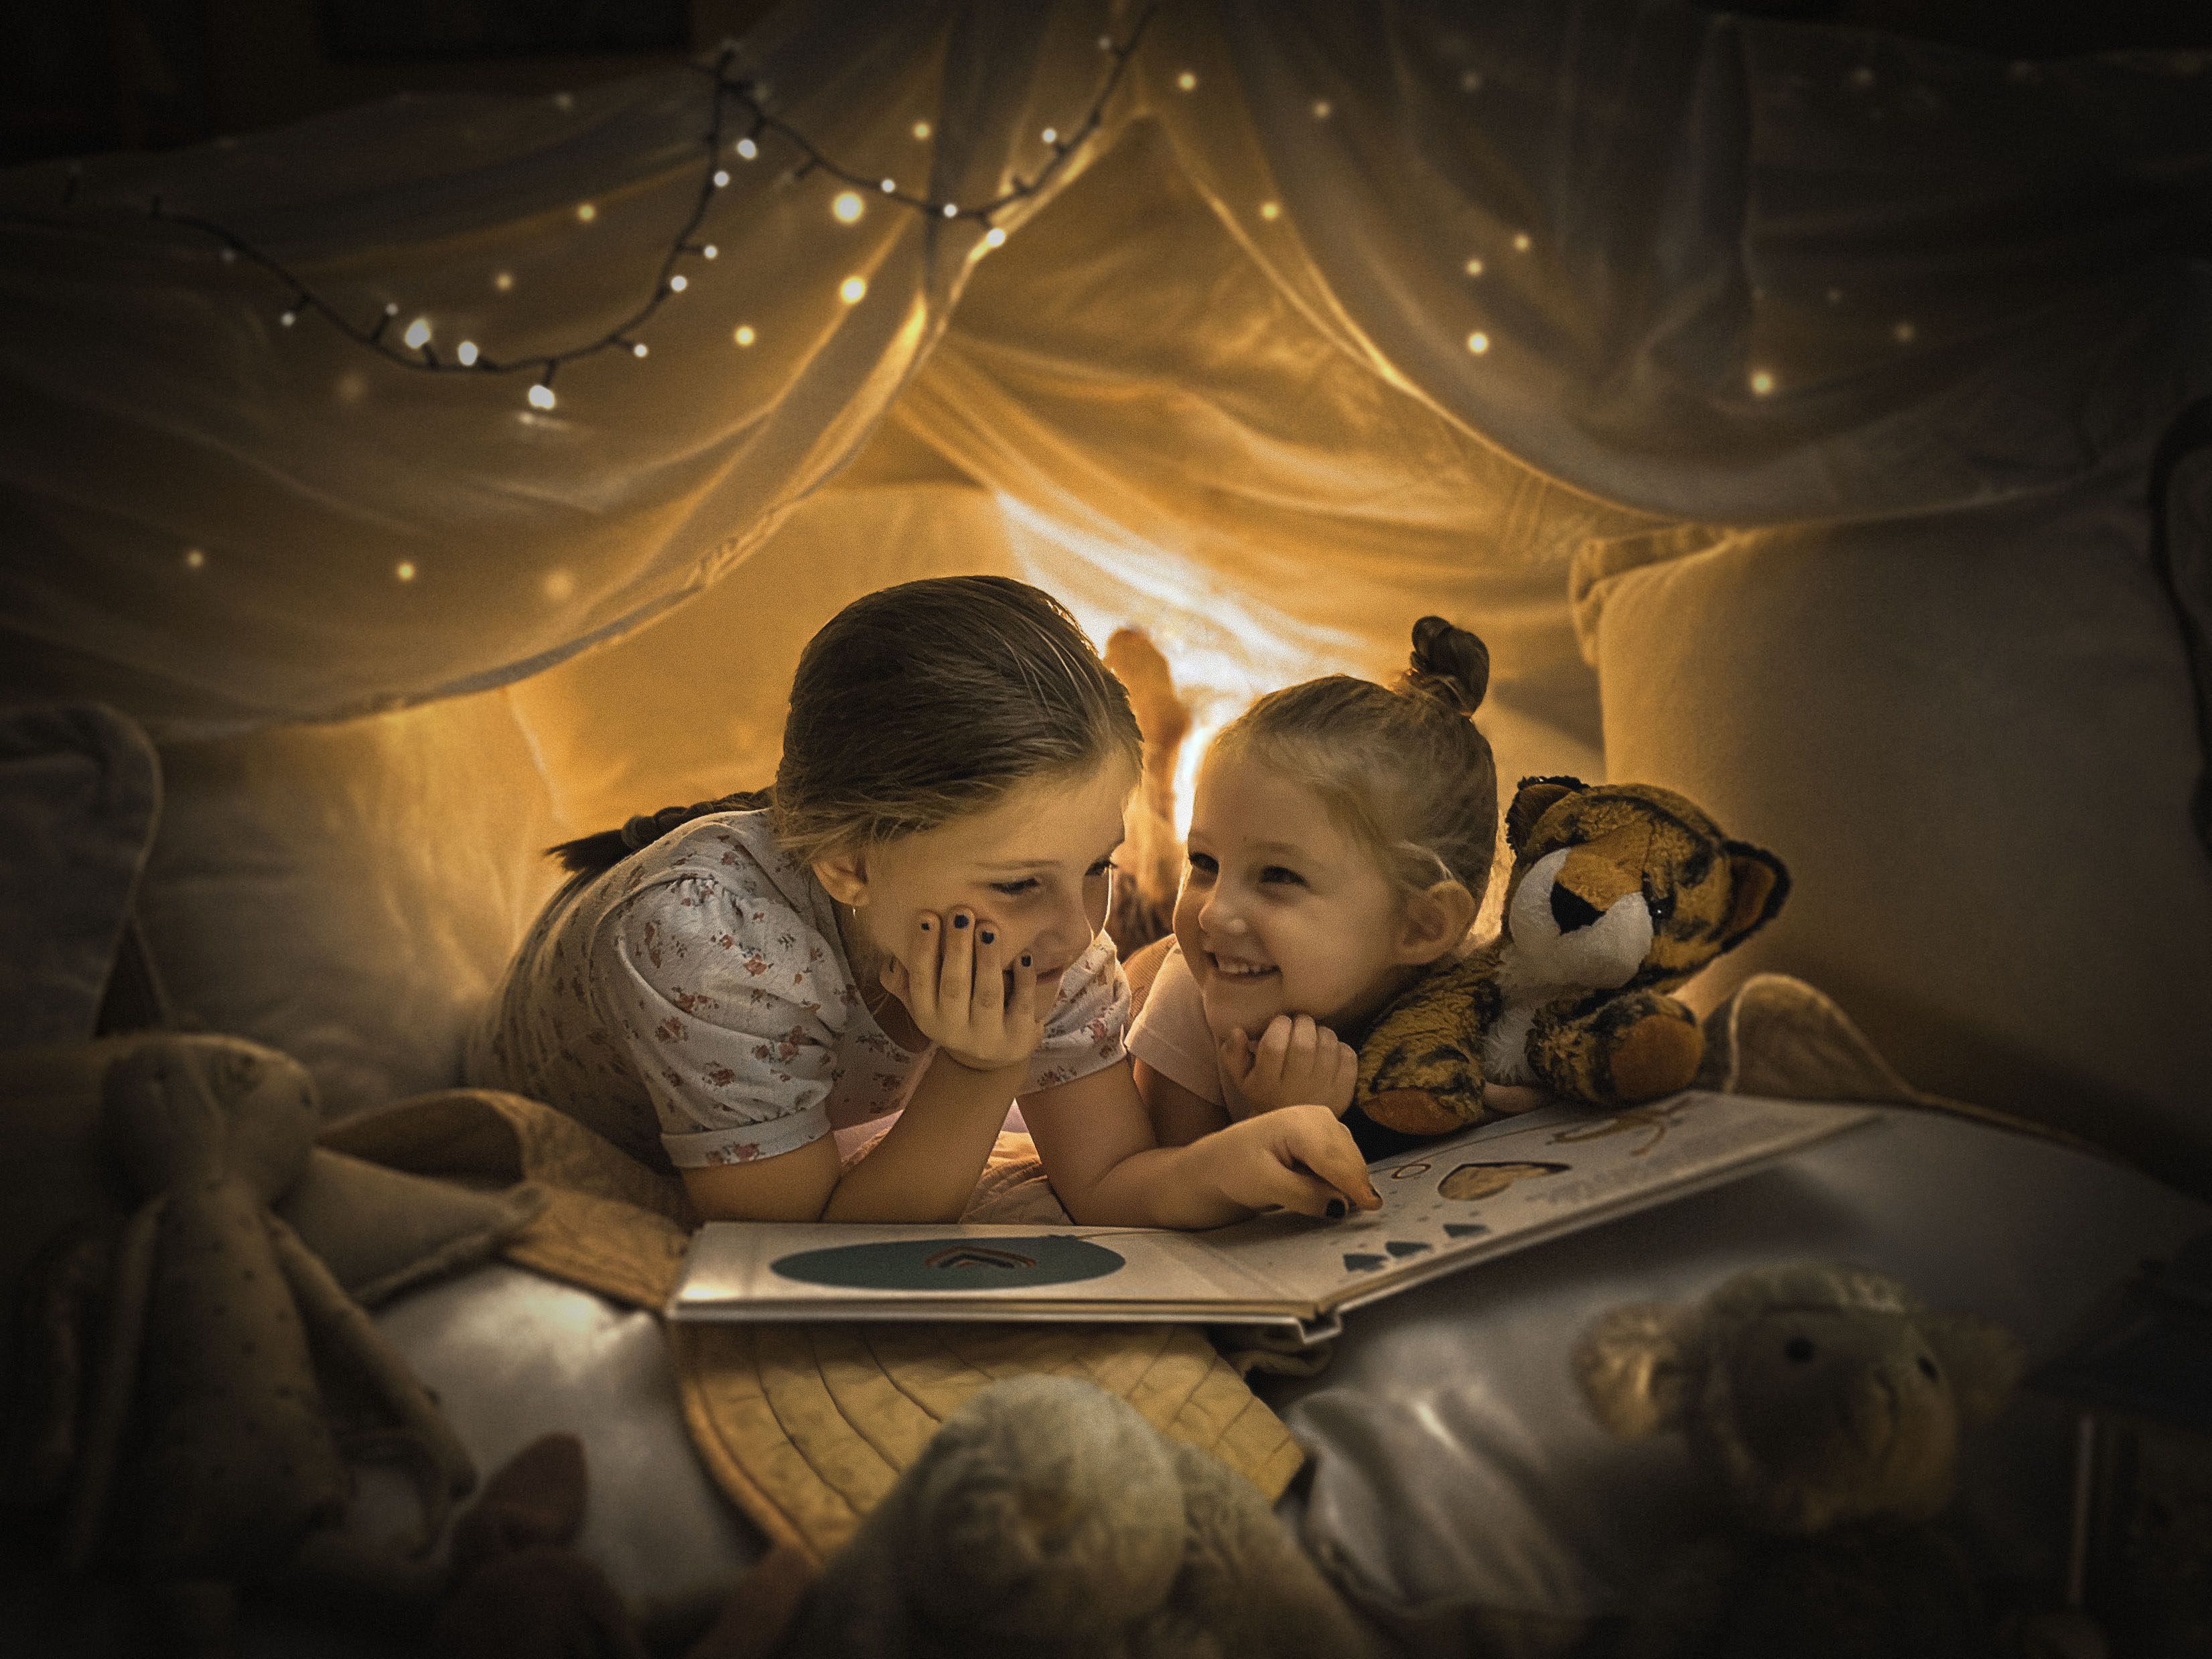 Two children in a cubby reading